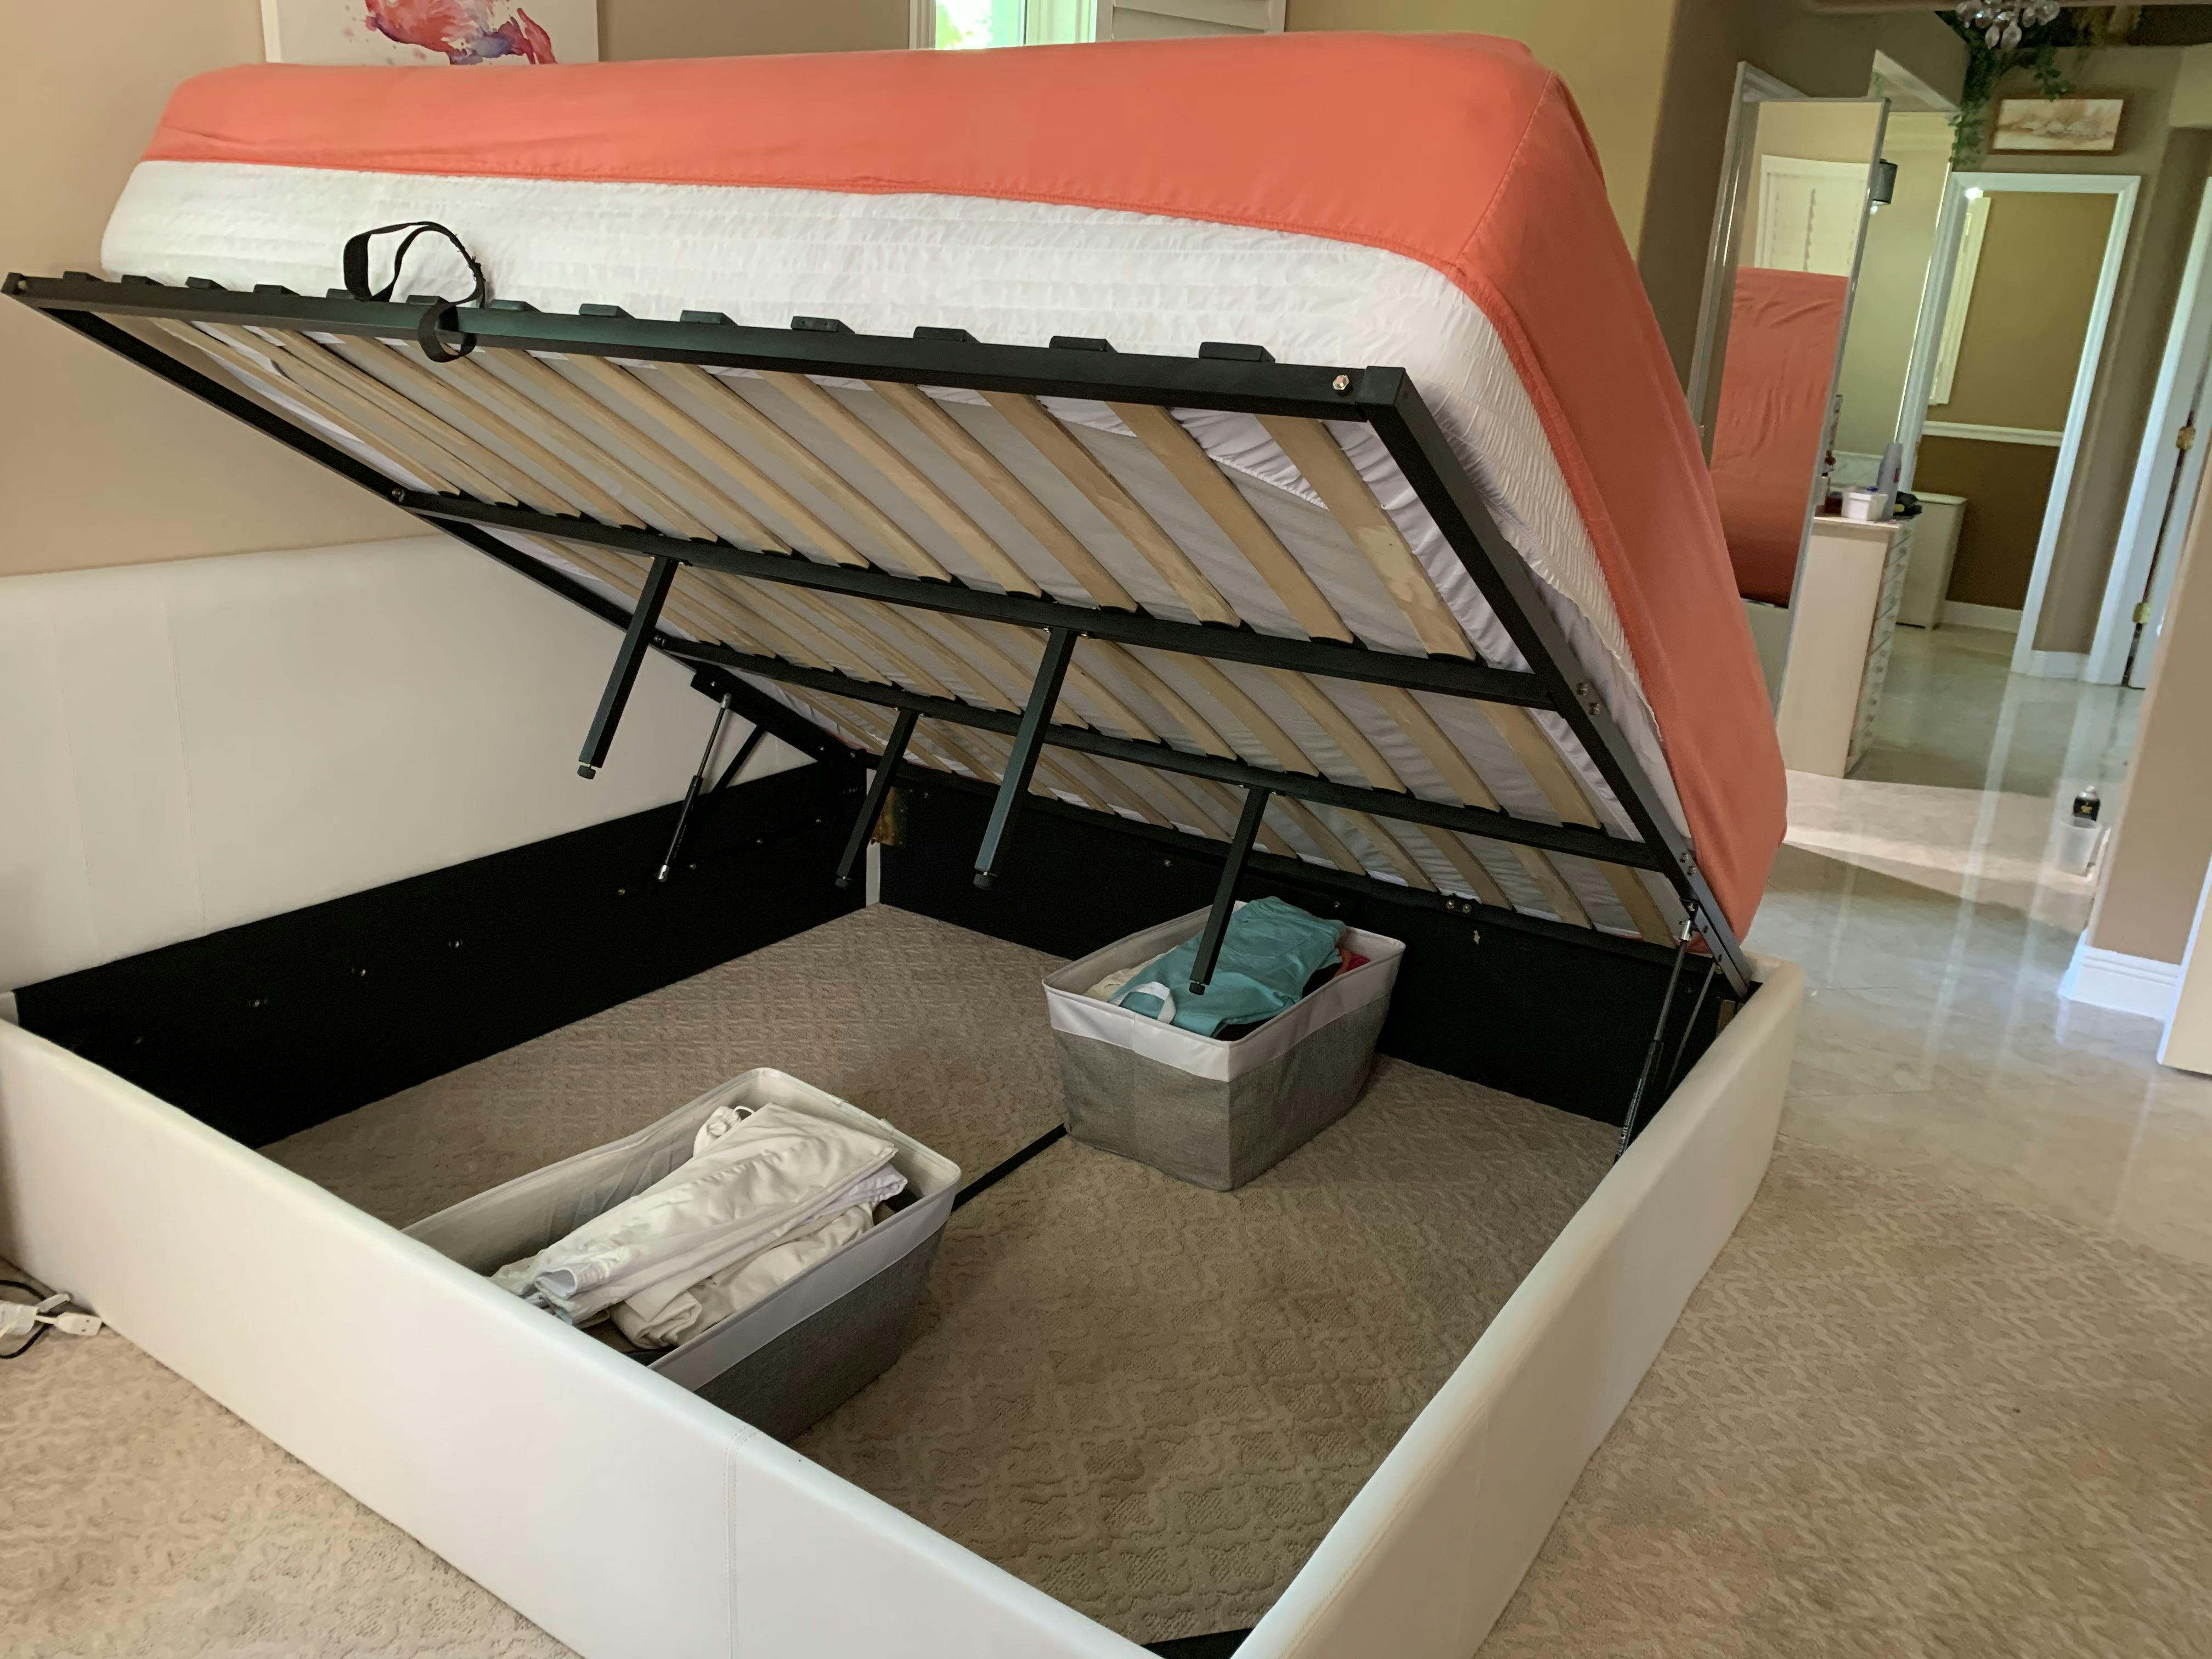 Reveal Queen Side Lifting Storage Bed Expand Furniture Folding Tables Smarter Wall Beds Space Savers